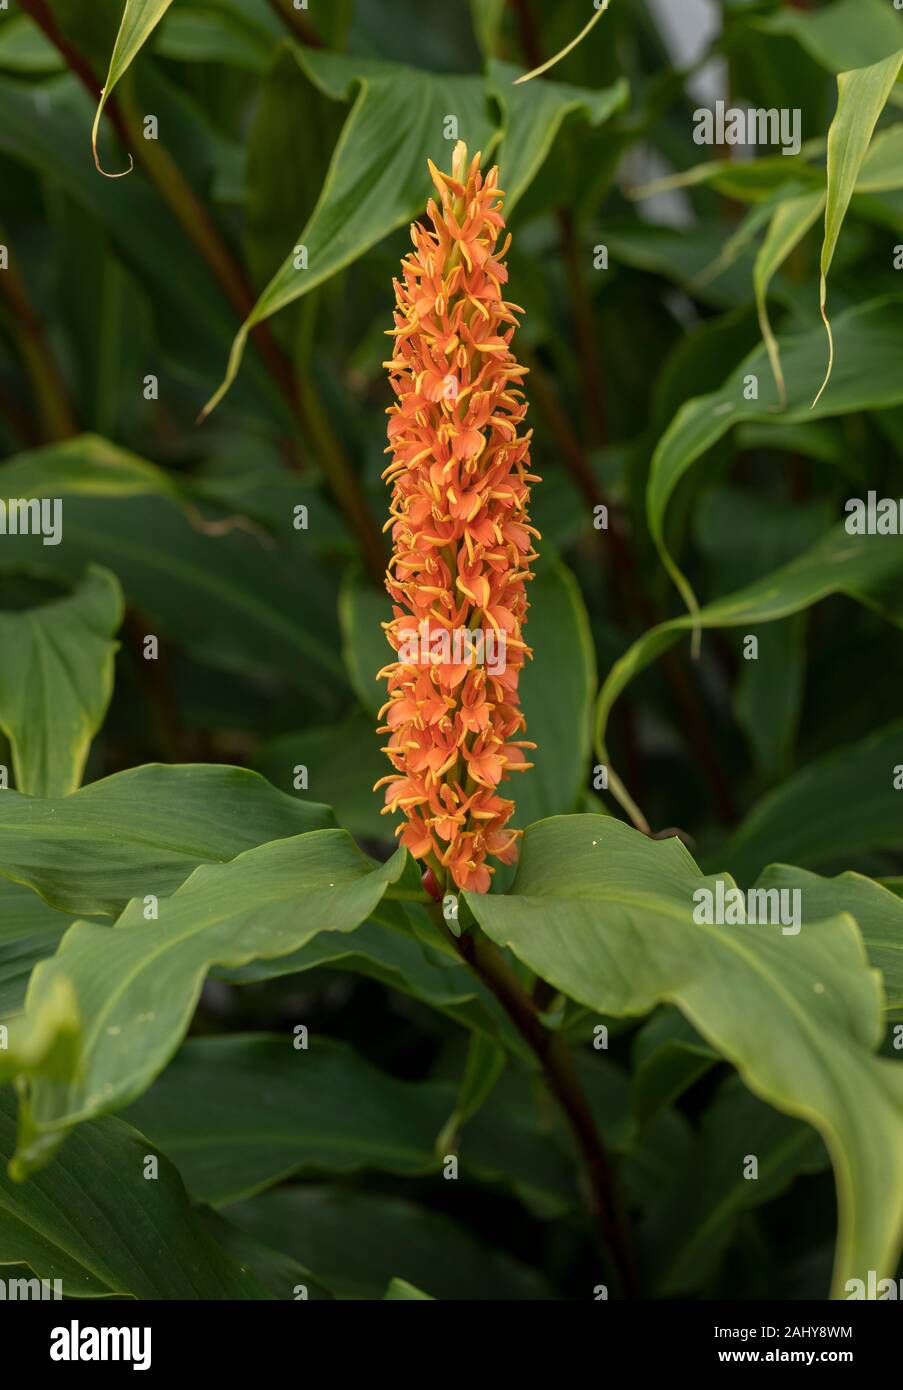 Hedychium forrestii var. latibracteatum. A type of ginger, from eastern Asia. Stock Photo